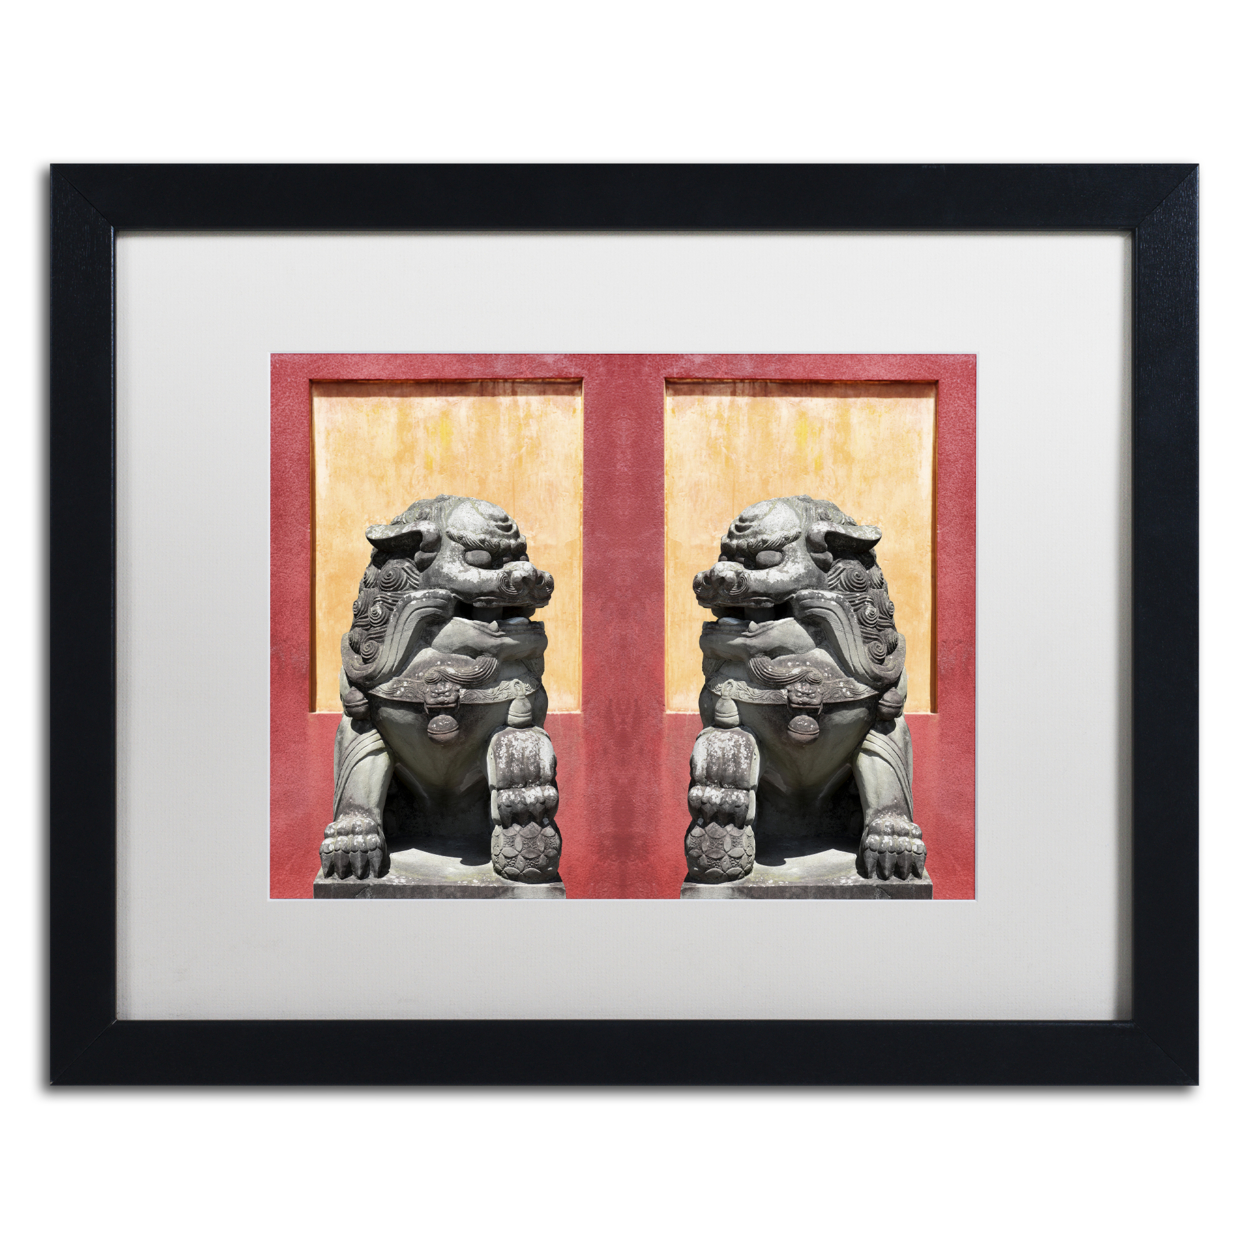 Philippe Hugonnard 'Lions Kings' Black Wooden Framed Art 18 X 22 Inches